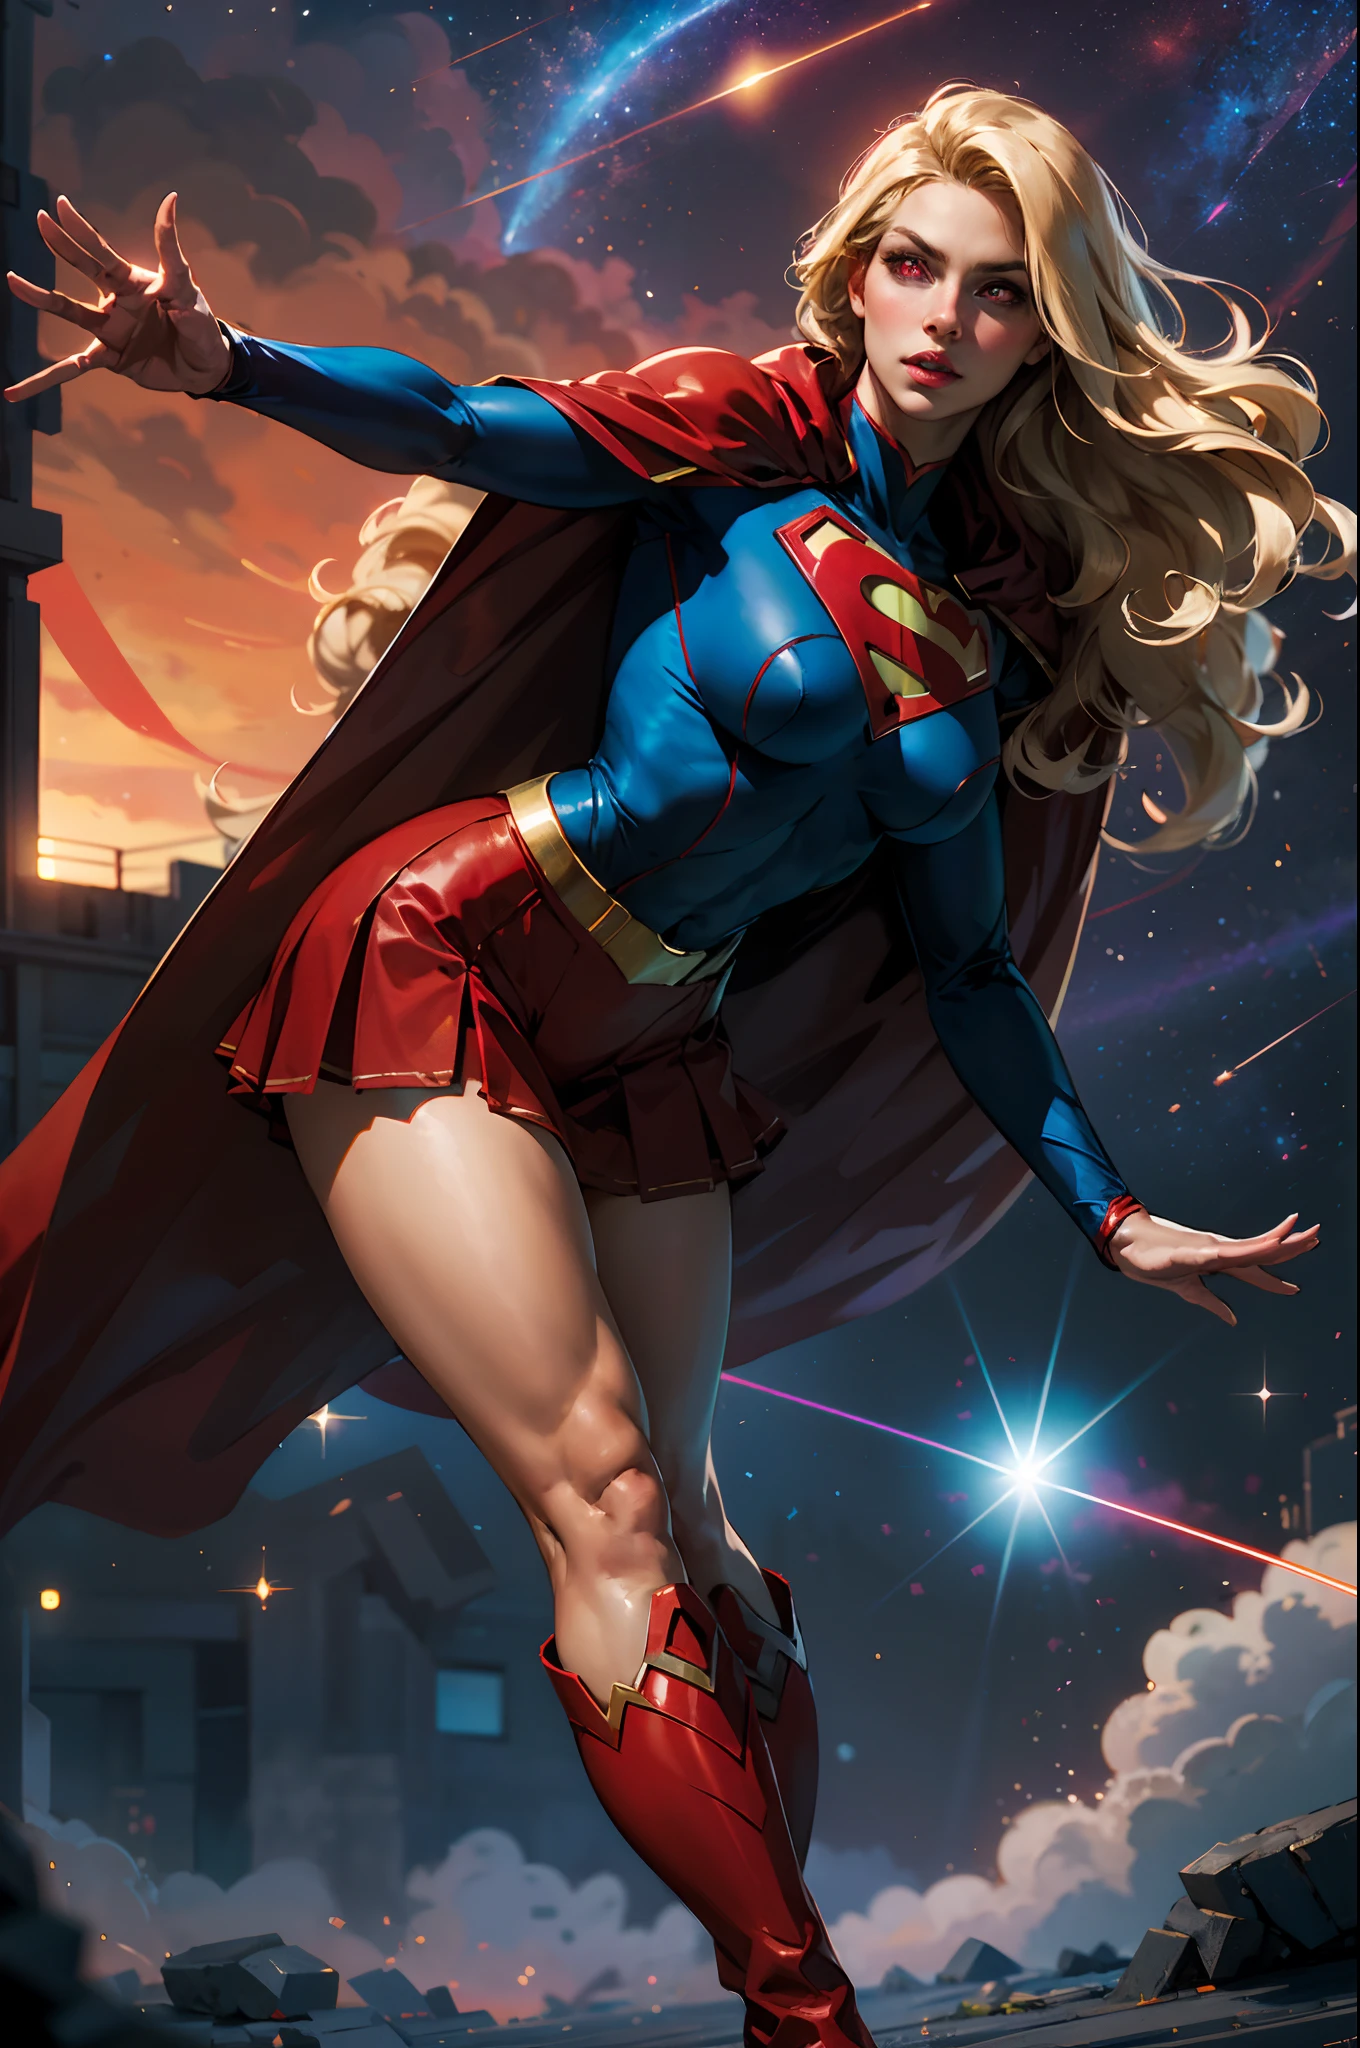 nijistyle, Cowboy shot of beautiful woman in Superman costume, Long Blonde Hair, Heroic, Glowing red eyes, laser eyes, Cape, Particle, skyporn, Red skirt, Red boots, Sexy Pose, large udder, nigh sky, Countless stars, Raise one hand, flying pose,